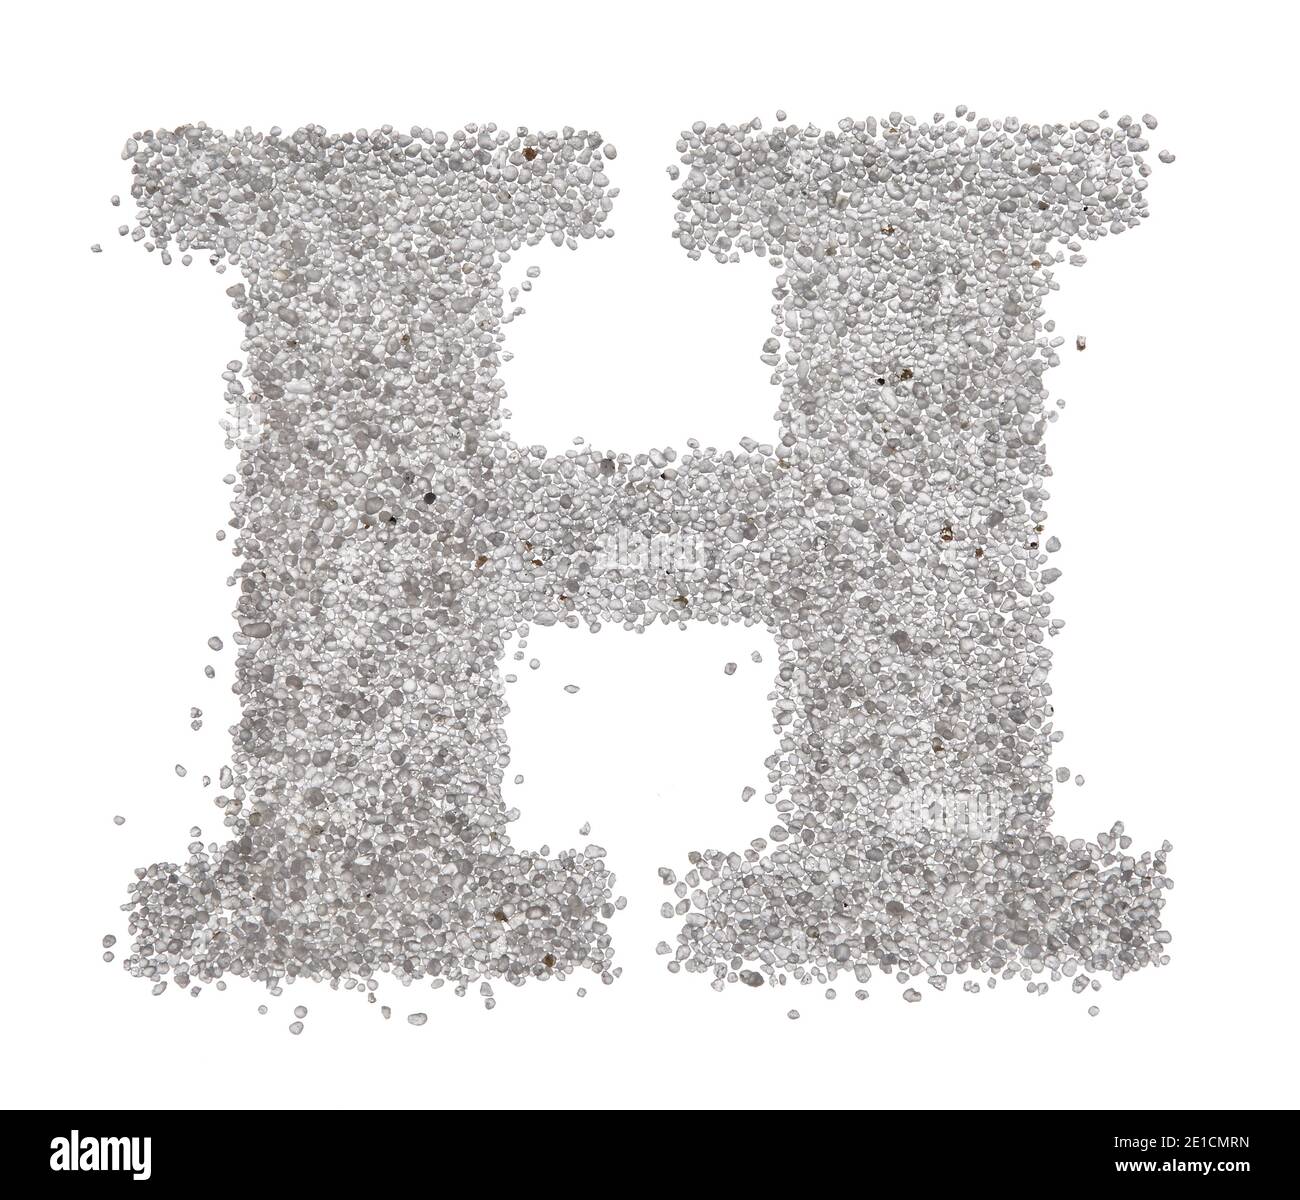 Serif sand letter capital H with a hard edge photographed on a white background Stock Photo